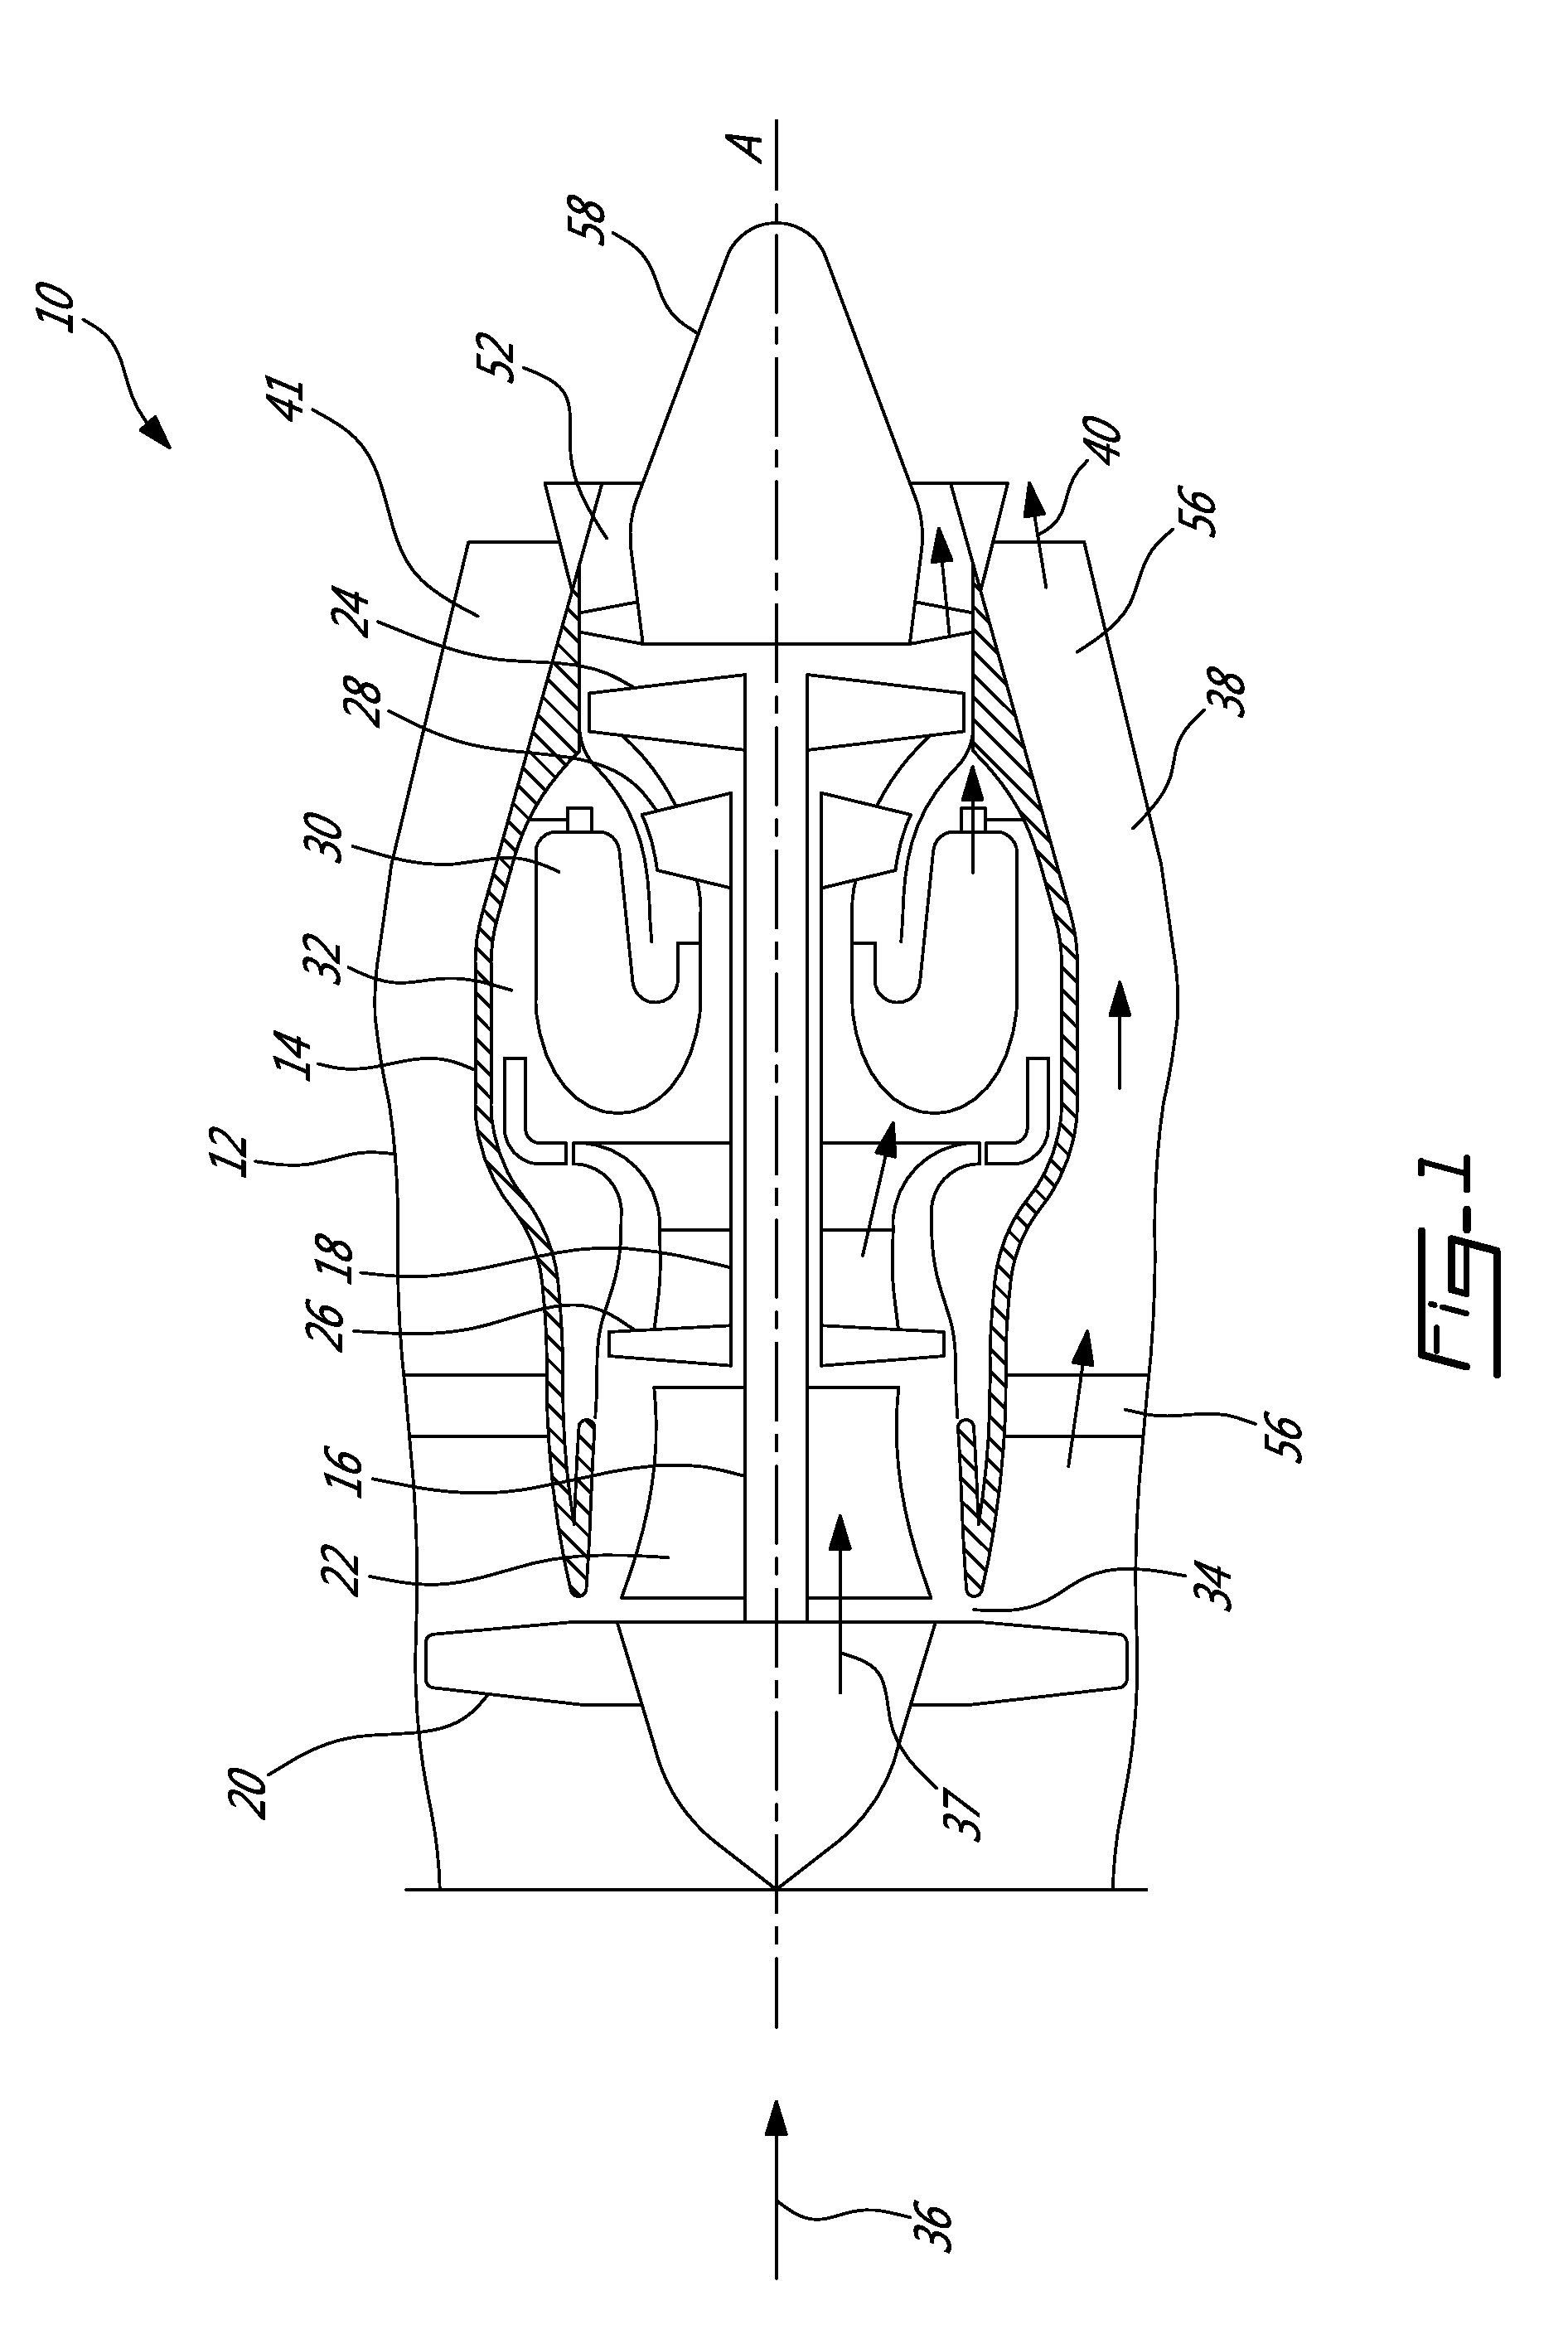 Air cooling design for tail-cone generator installation